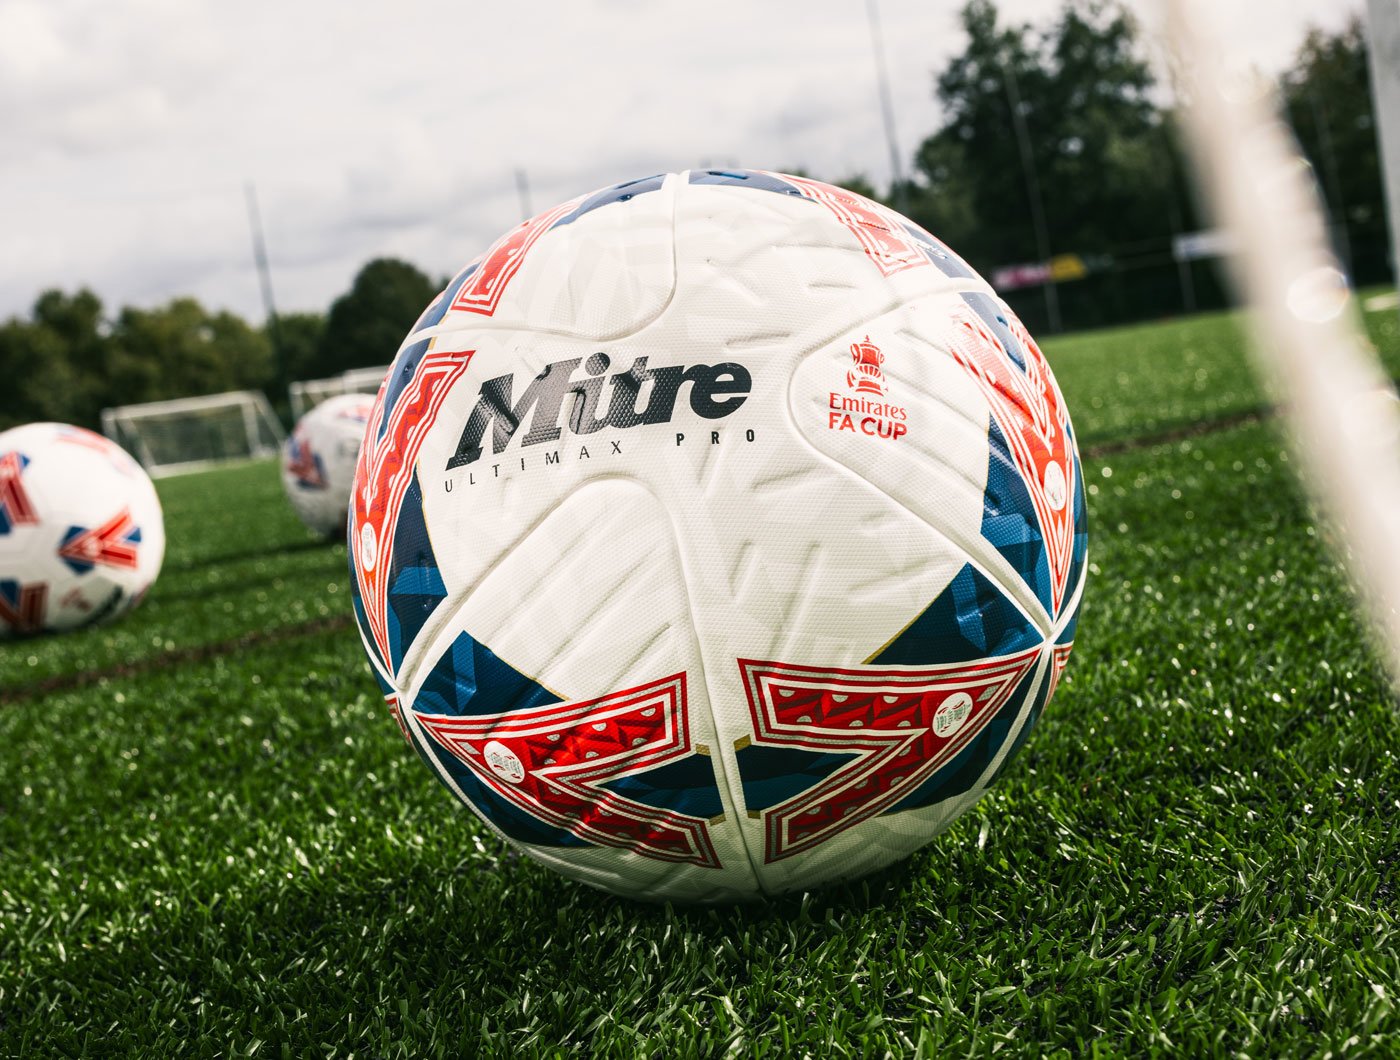 Mitre Footballs feauturing the Mitre Ultimax Pro FA Cup Ball